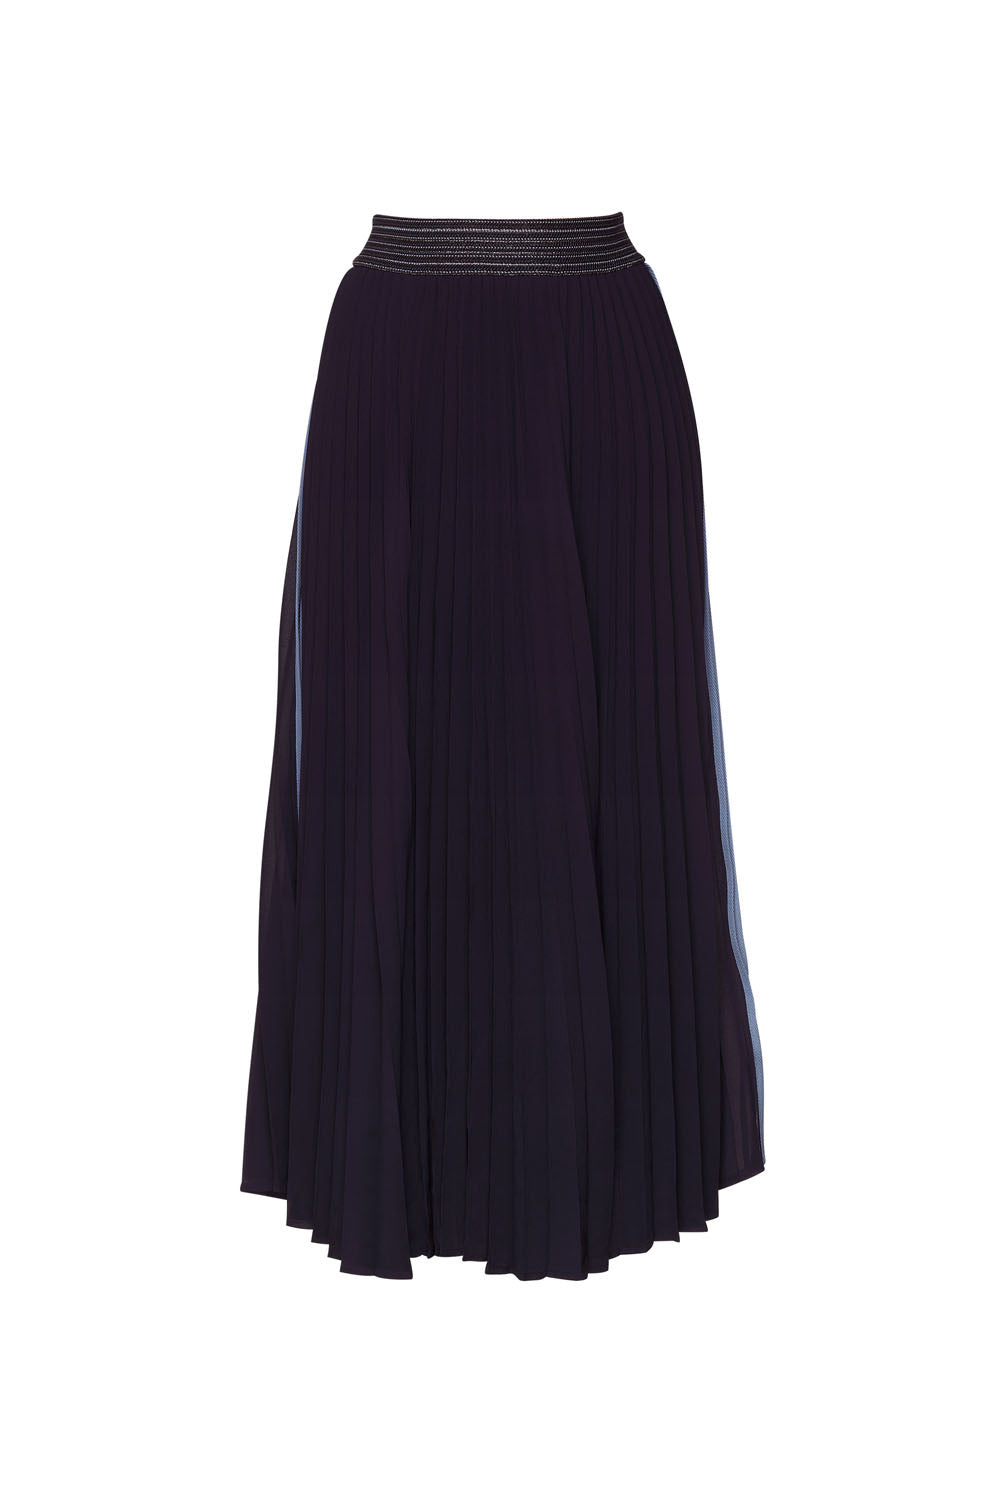 Madly Sweetly by Loobies Story Just Pleat It Skirt in Navy MS1224Pl